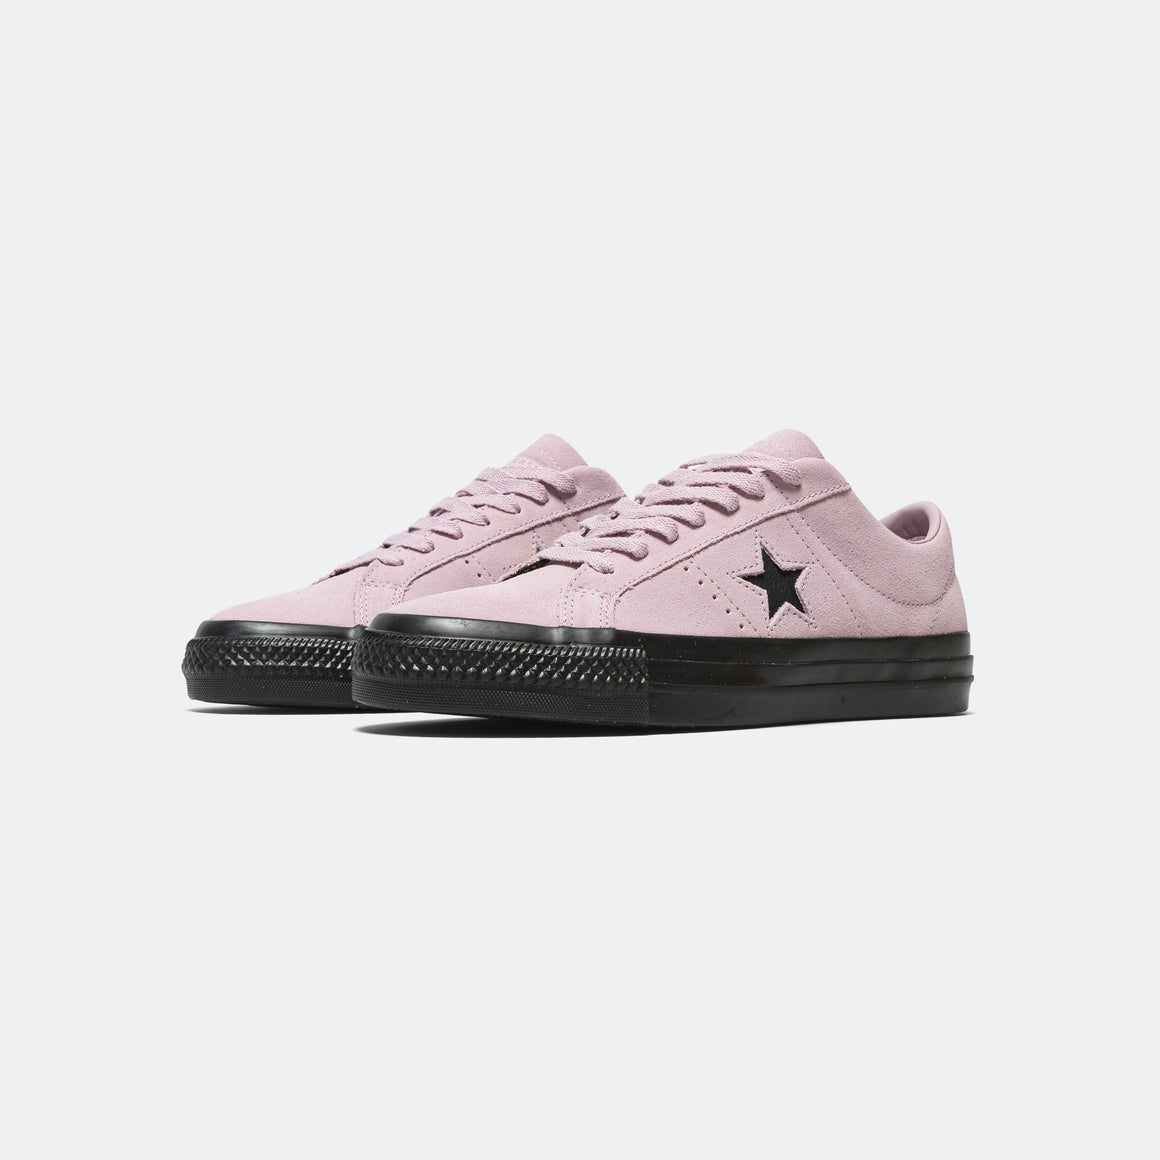 Converse - One Star Pro Suede - Violet/Black - UP THERE